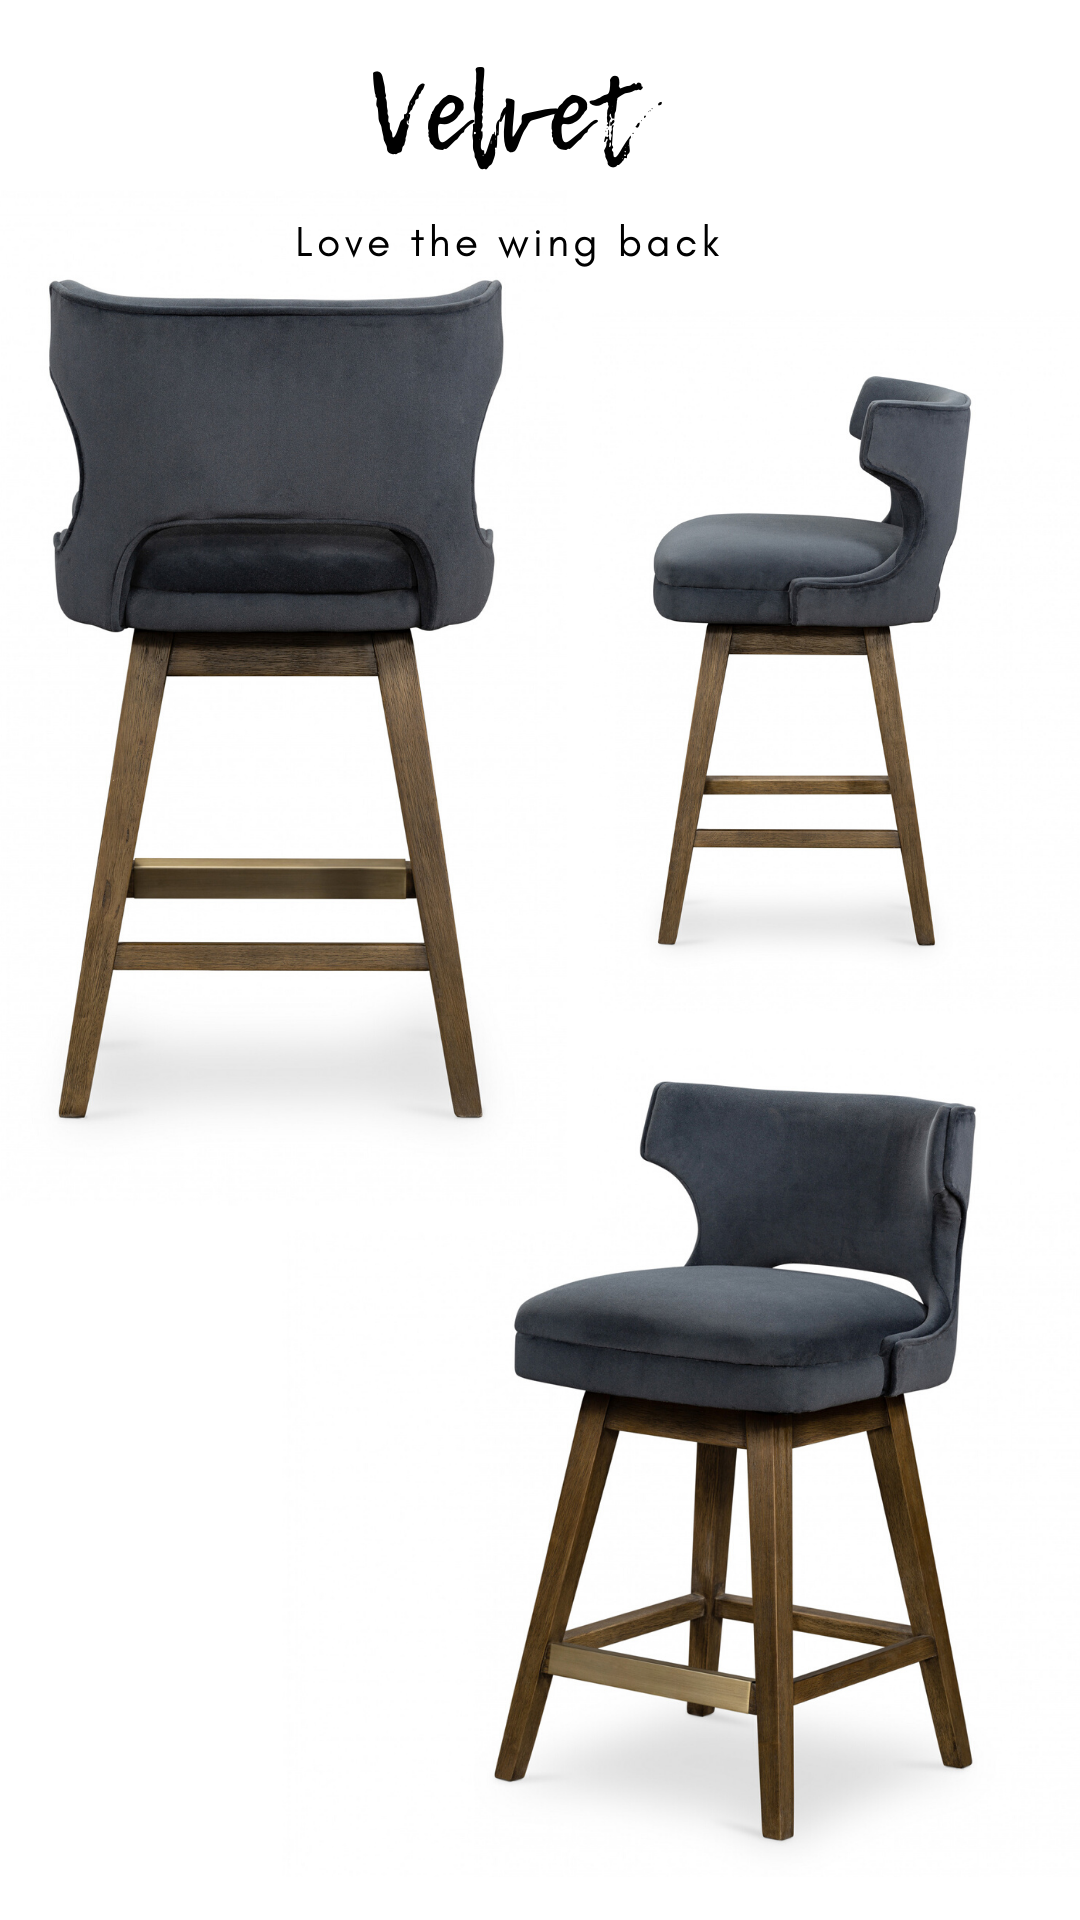 round-up-of-counter-stools-done-right-four-hands-task-bar-counter-stool-kathleen-jennison-stockton-california-interior-designer.png